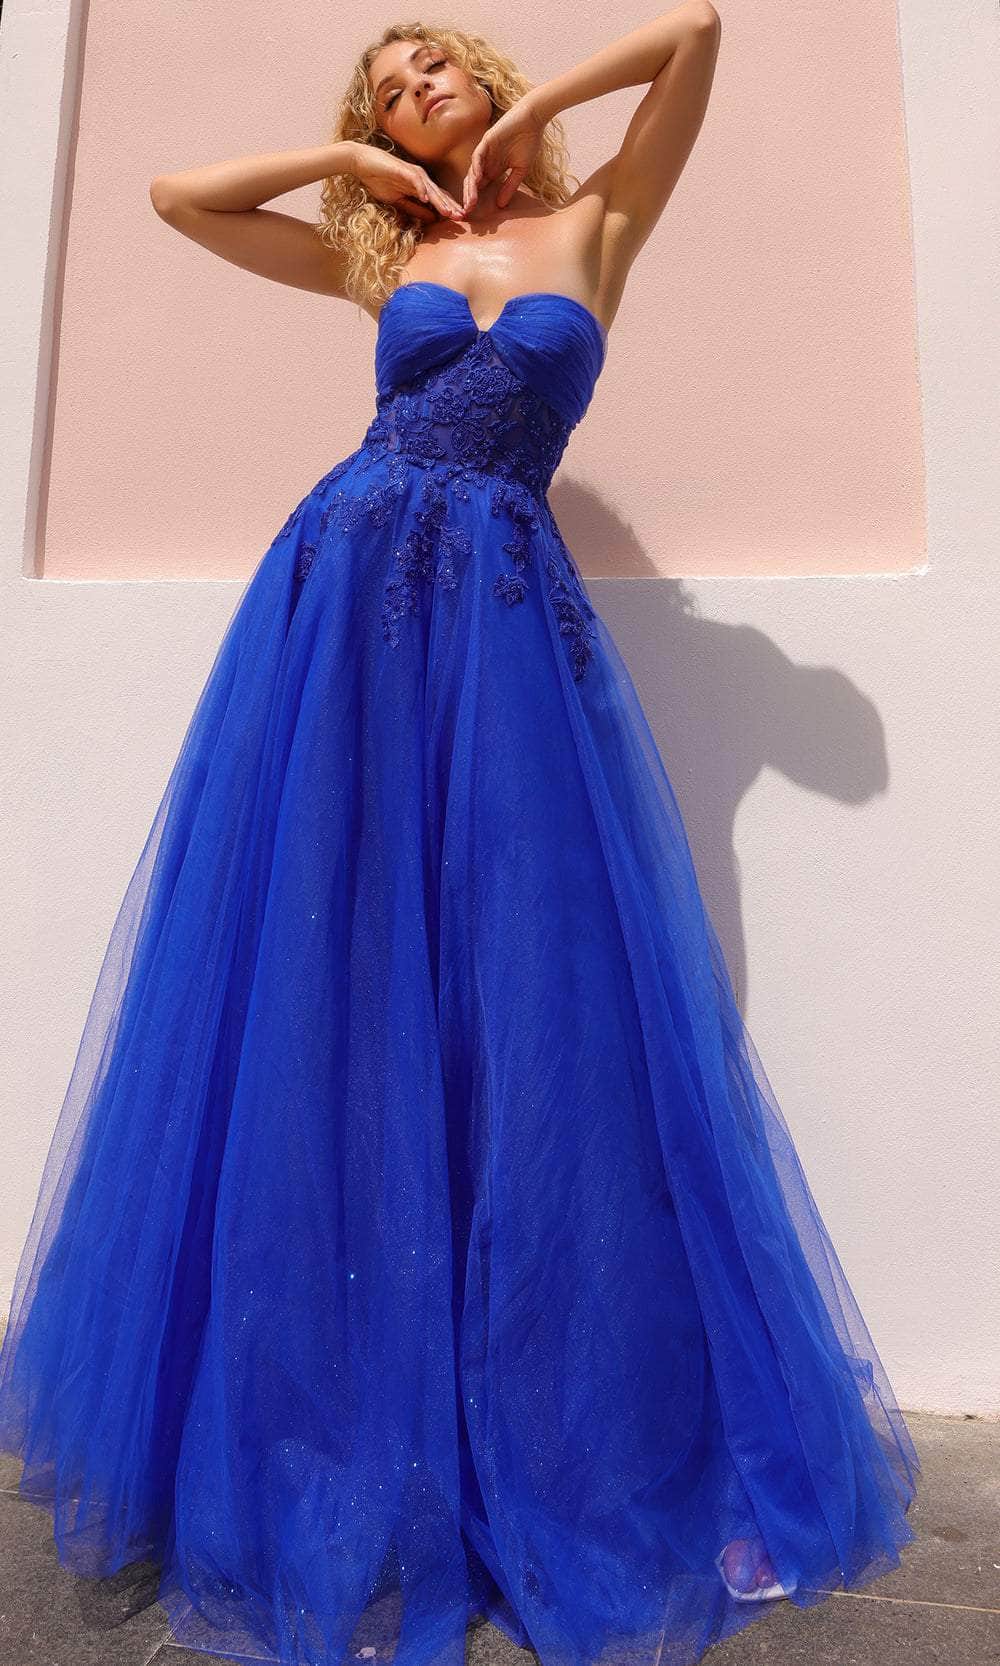 Nox Anabel T1326 - Sweetheart Appliqued Prom Dress Special Occasion Dress 4 / Royal Blue